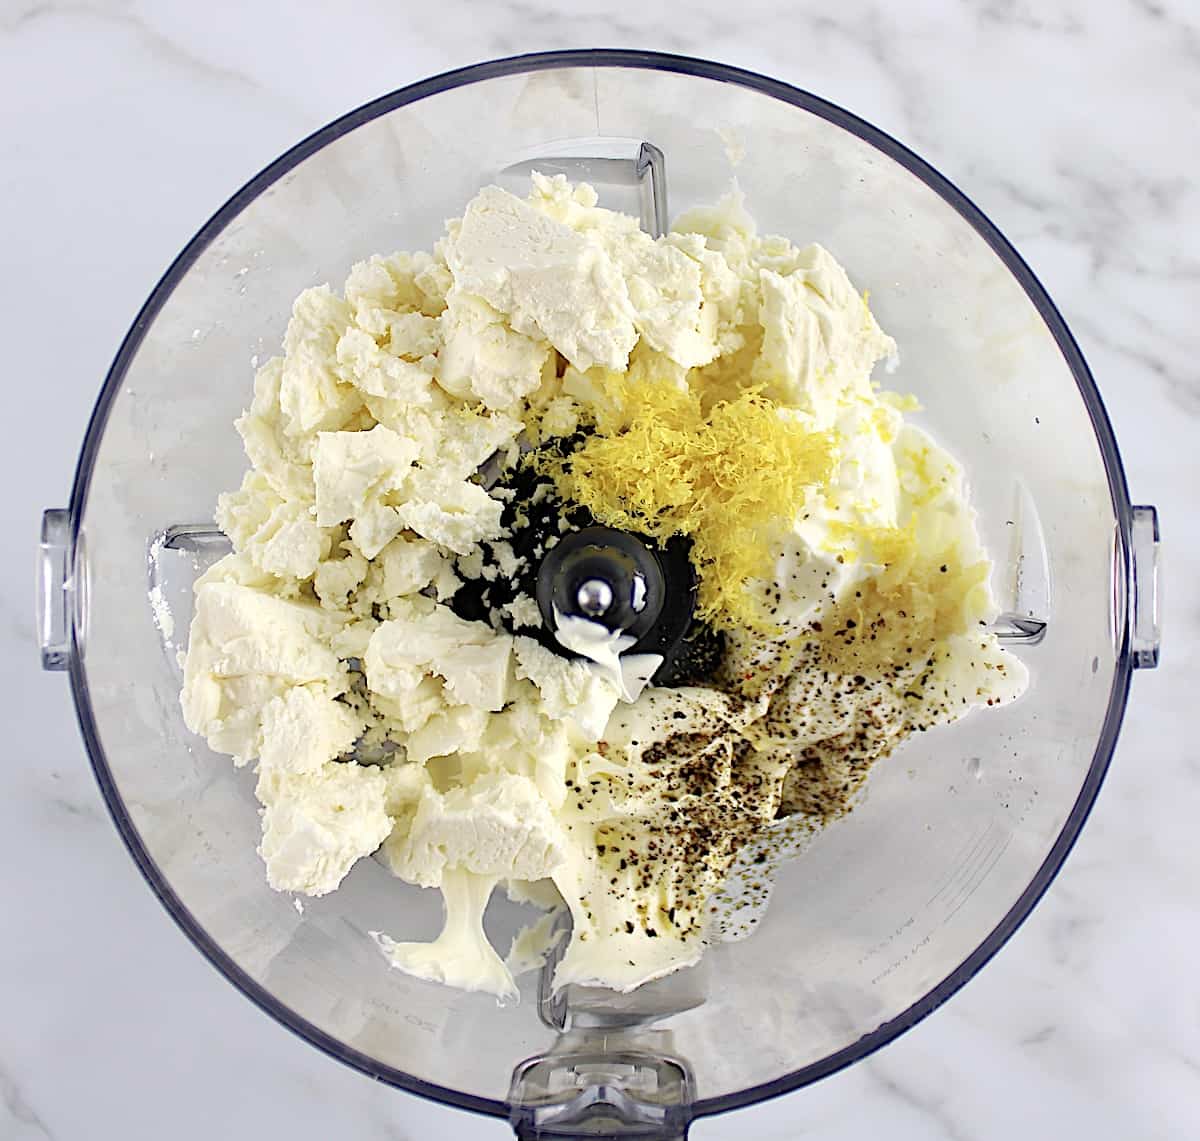 Whipped Feta Dip ingredients in food processor bowl unmixed